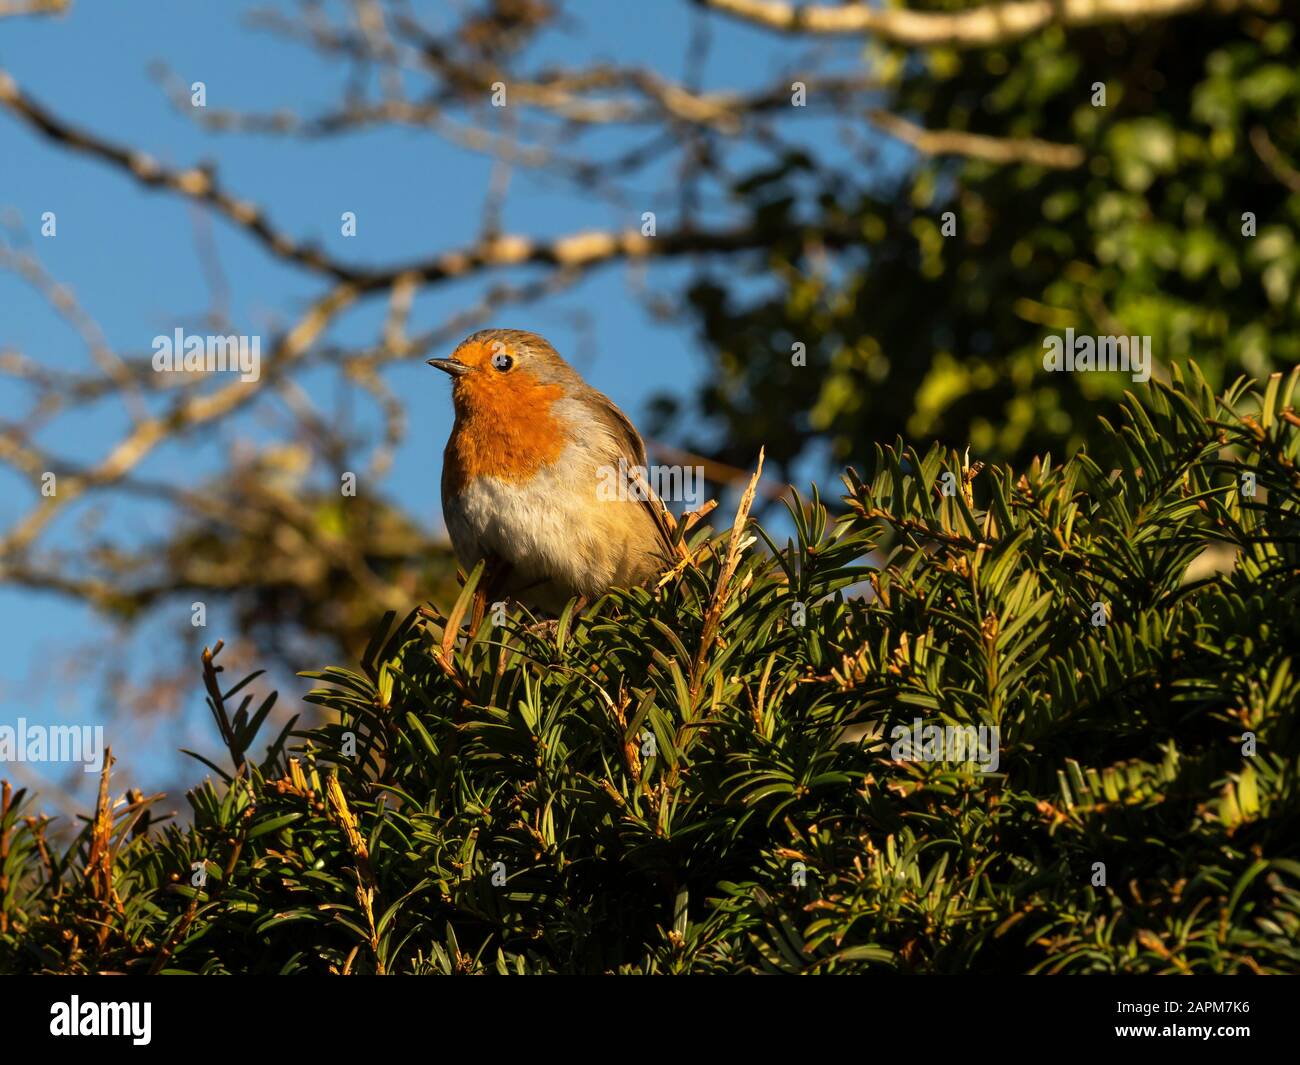 European robin, Erithacus rubecula, on a branch of a yew tree with a blue sky background Stock Photo